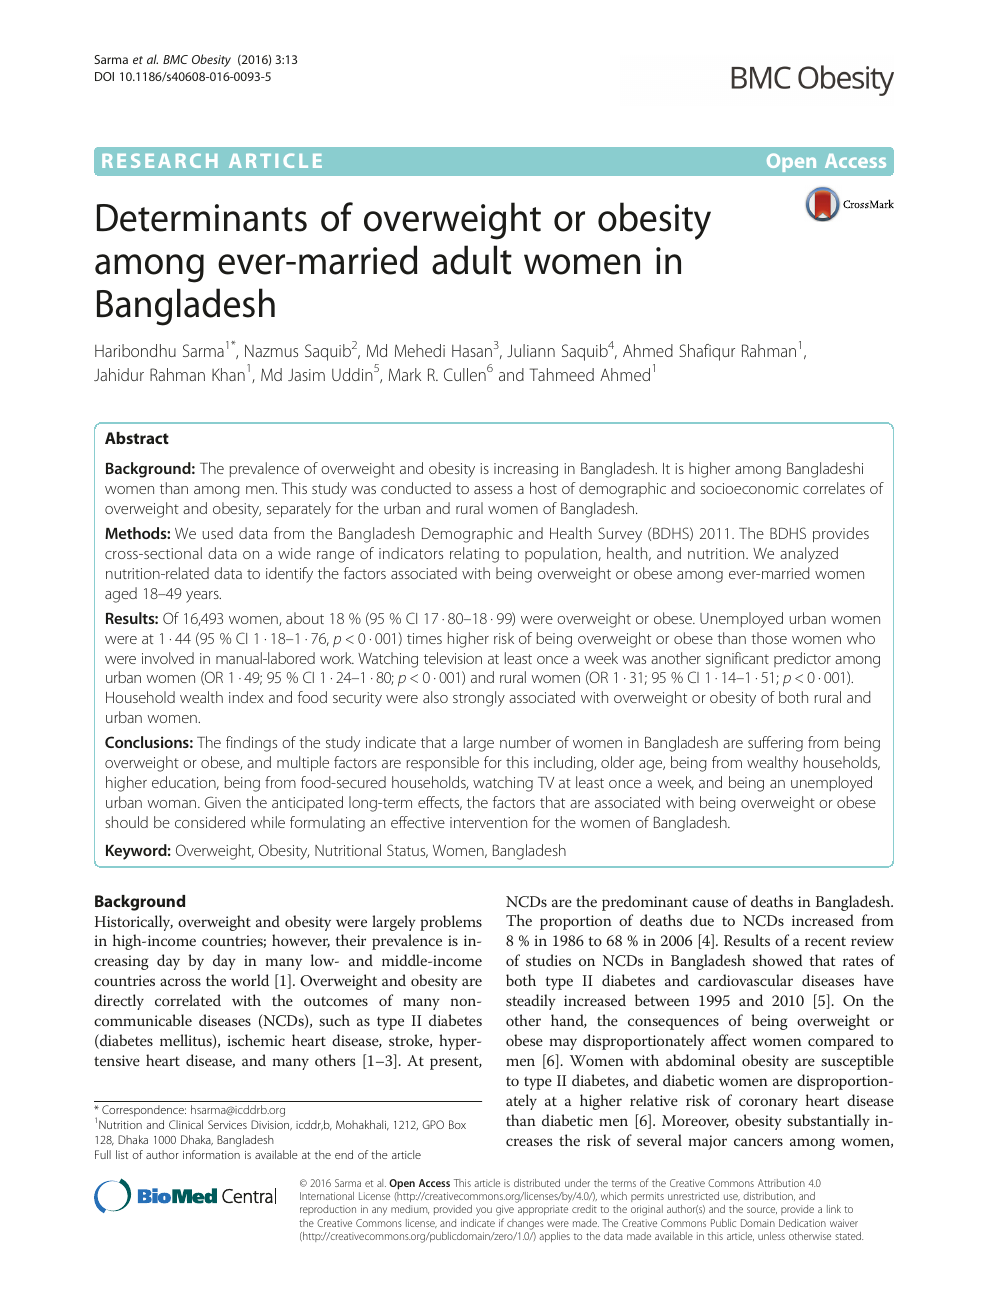 Determinants of overweight or obesity among ever-married adult women in Bangladesh photo pic